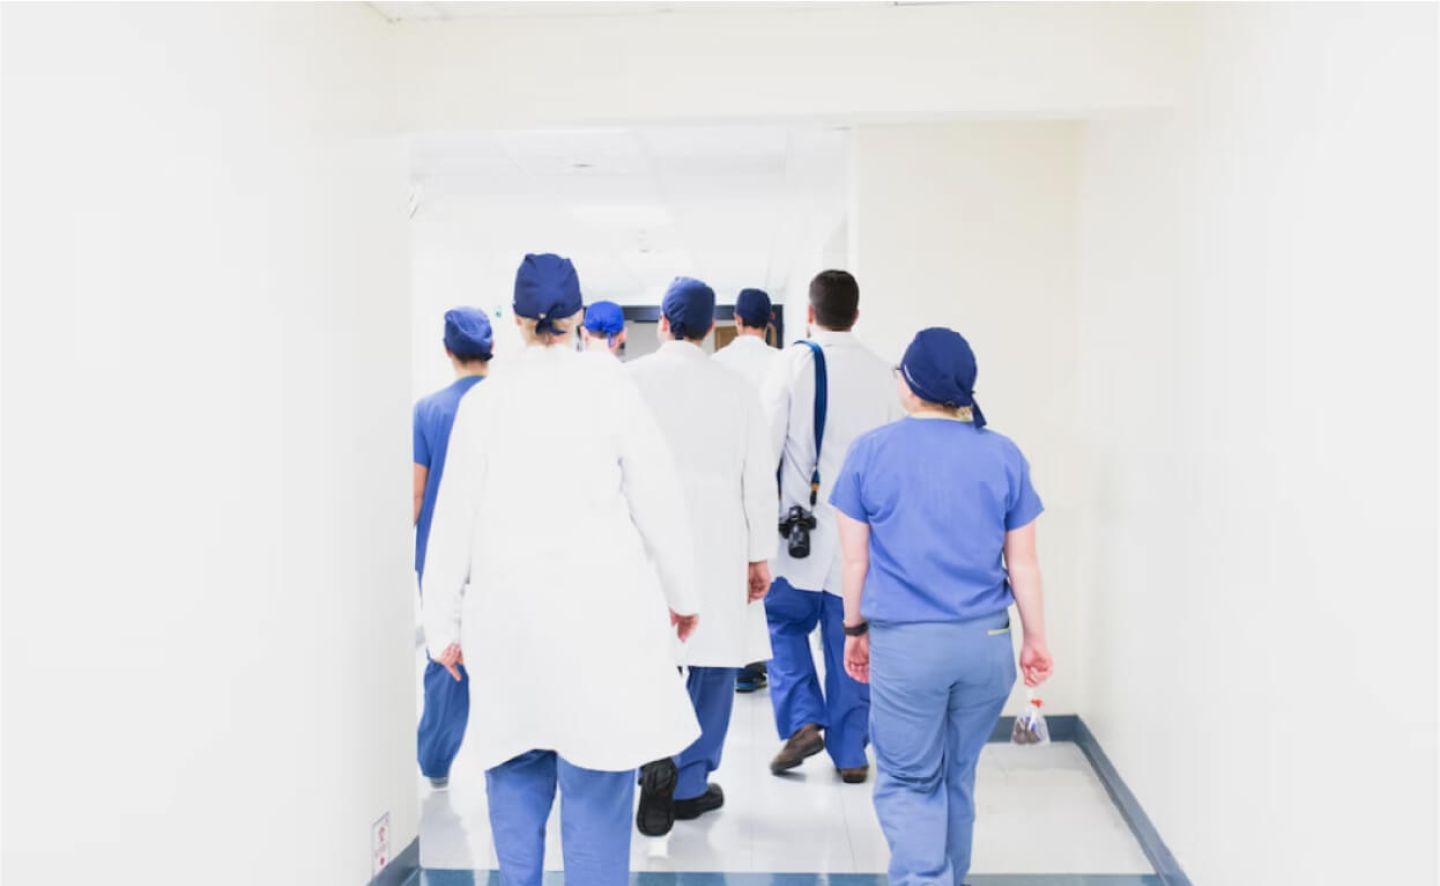 Group of doctor going to work in uniform